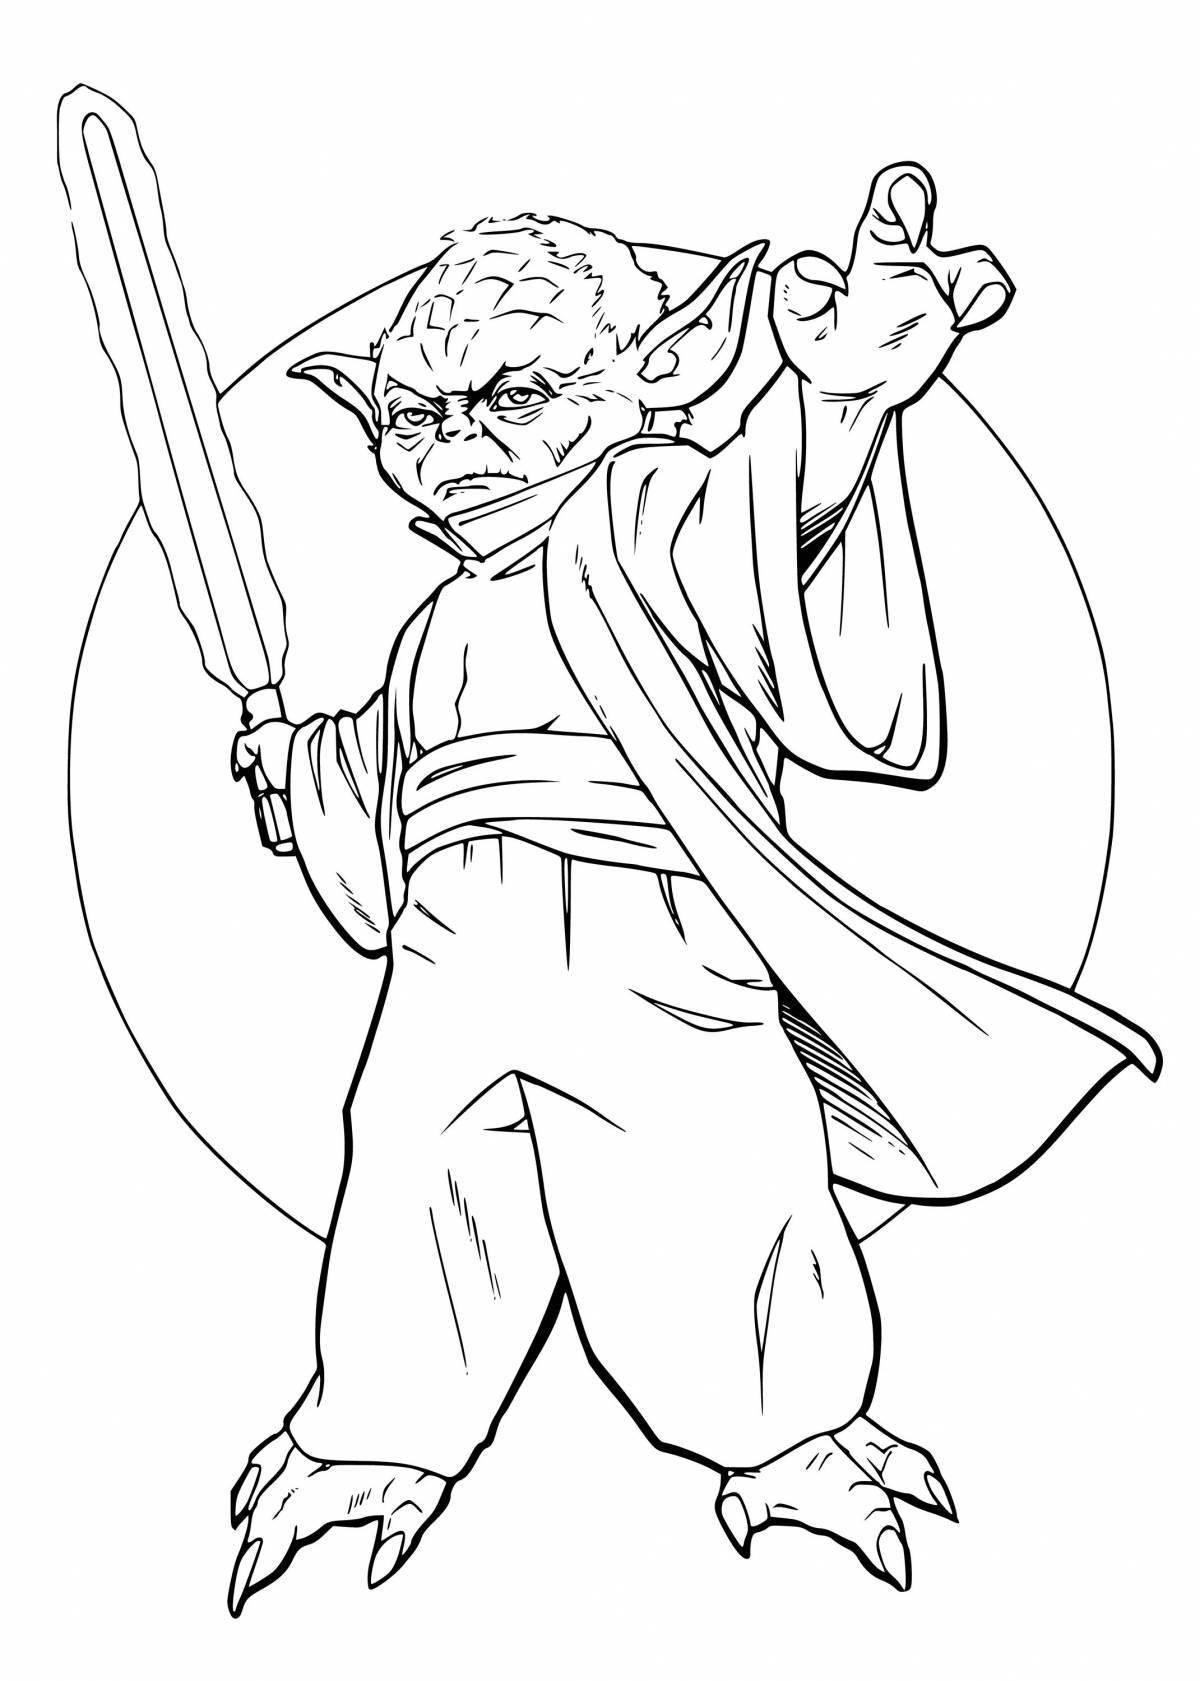 Flawless Jedi coloring page